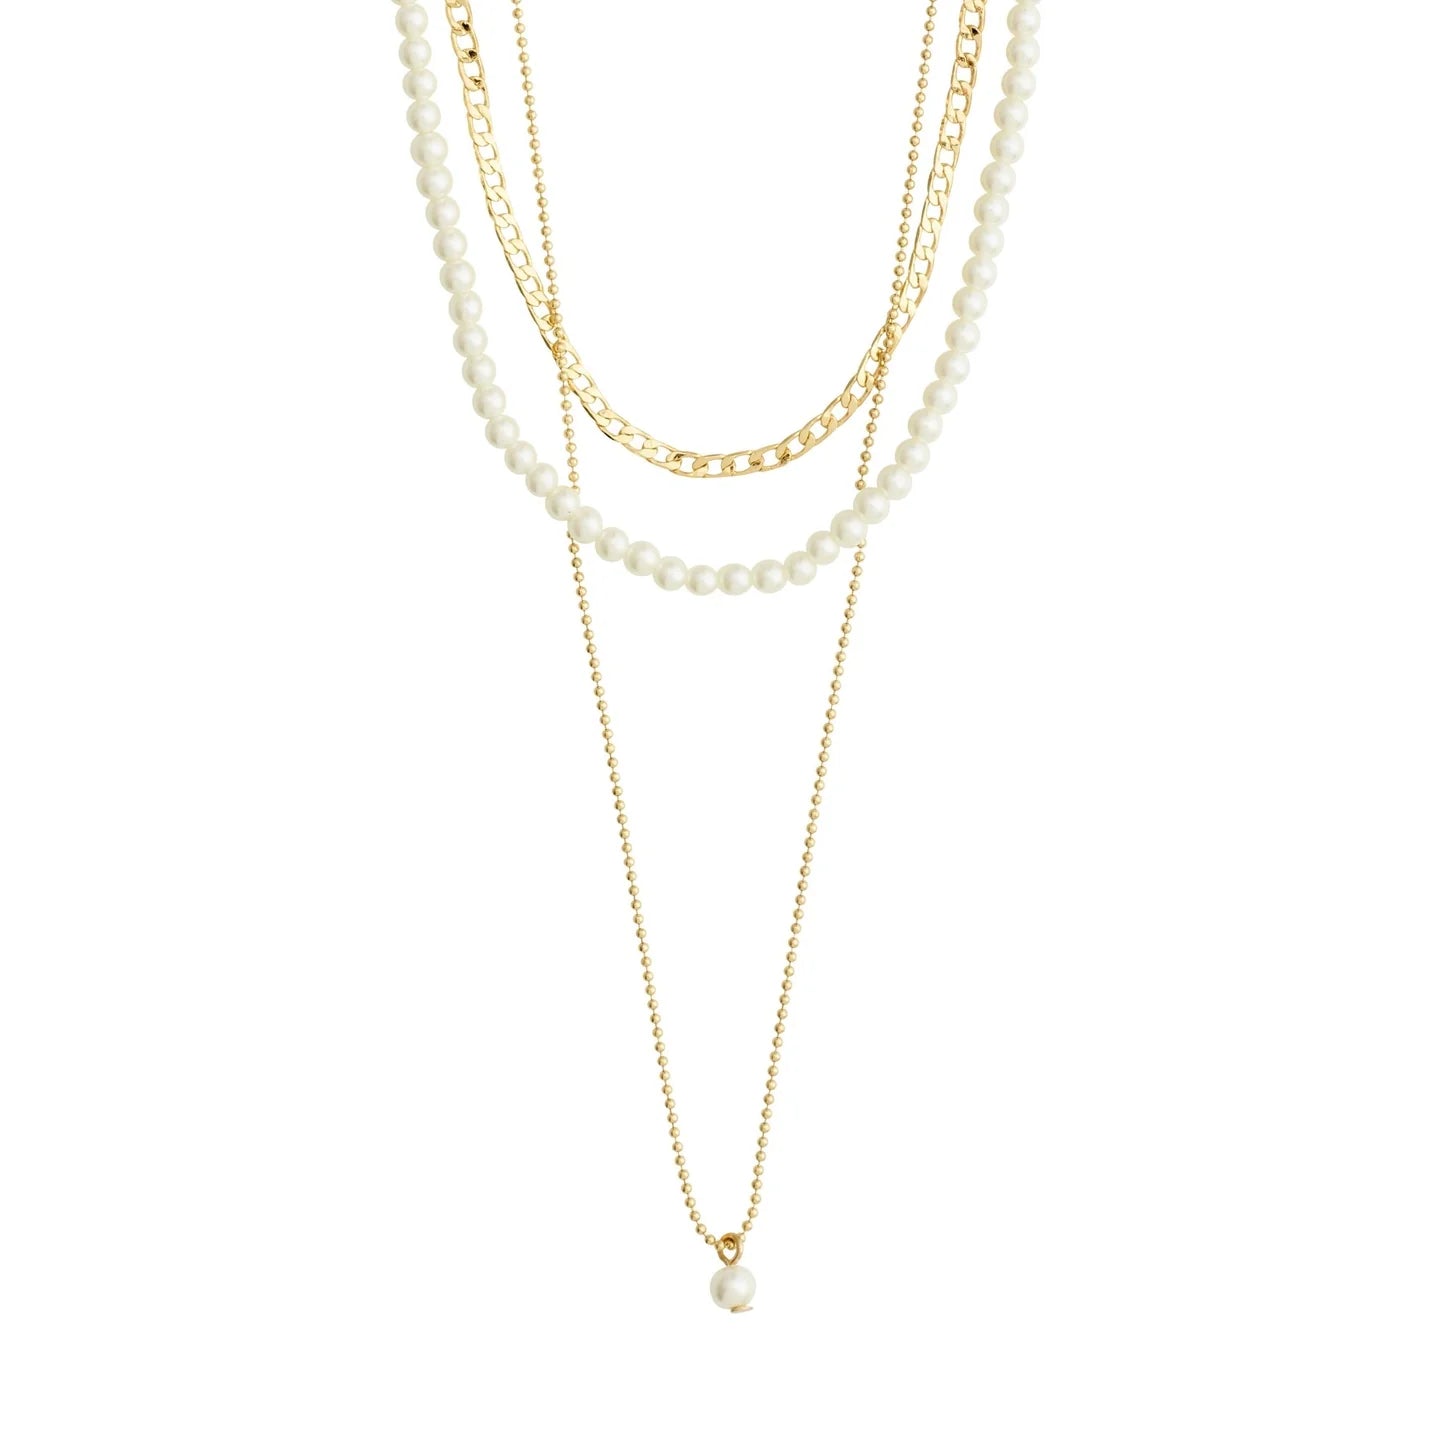 Baker 3 in 1 Gold Necklace